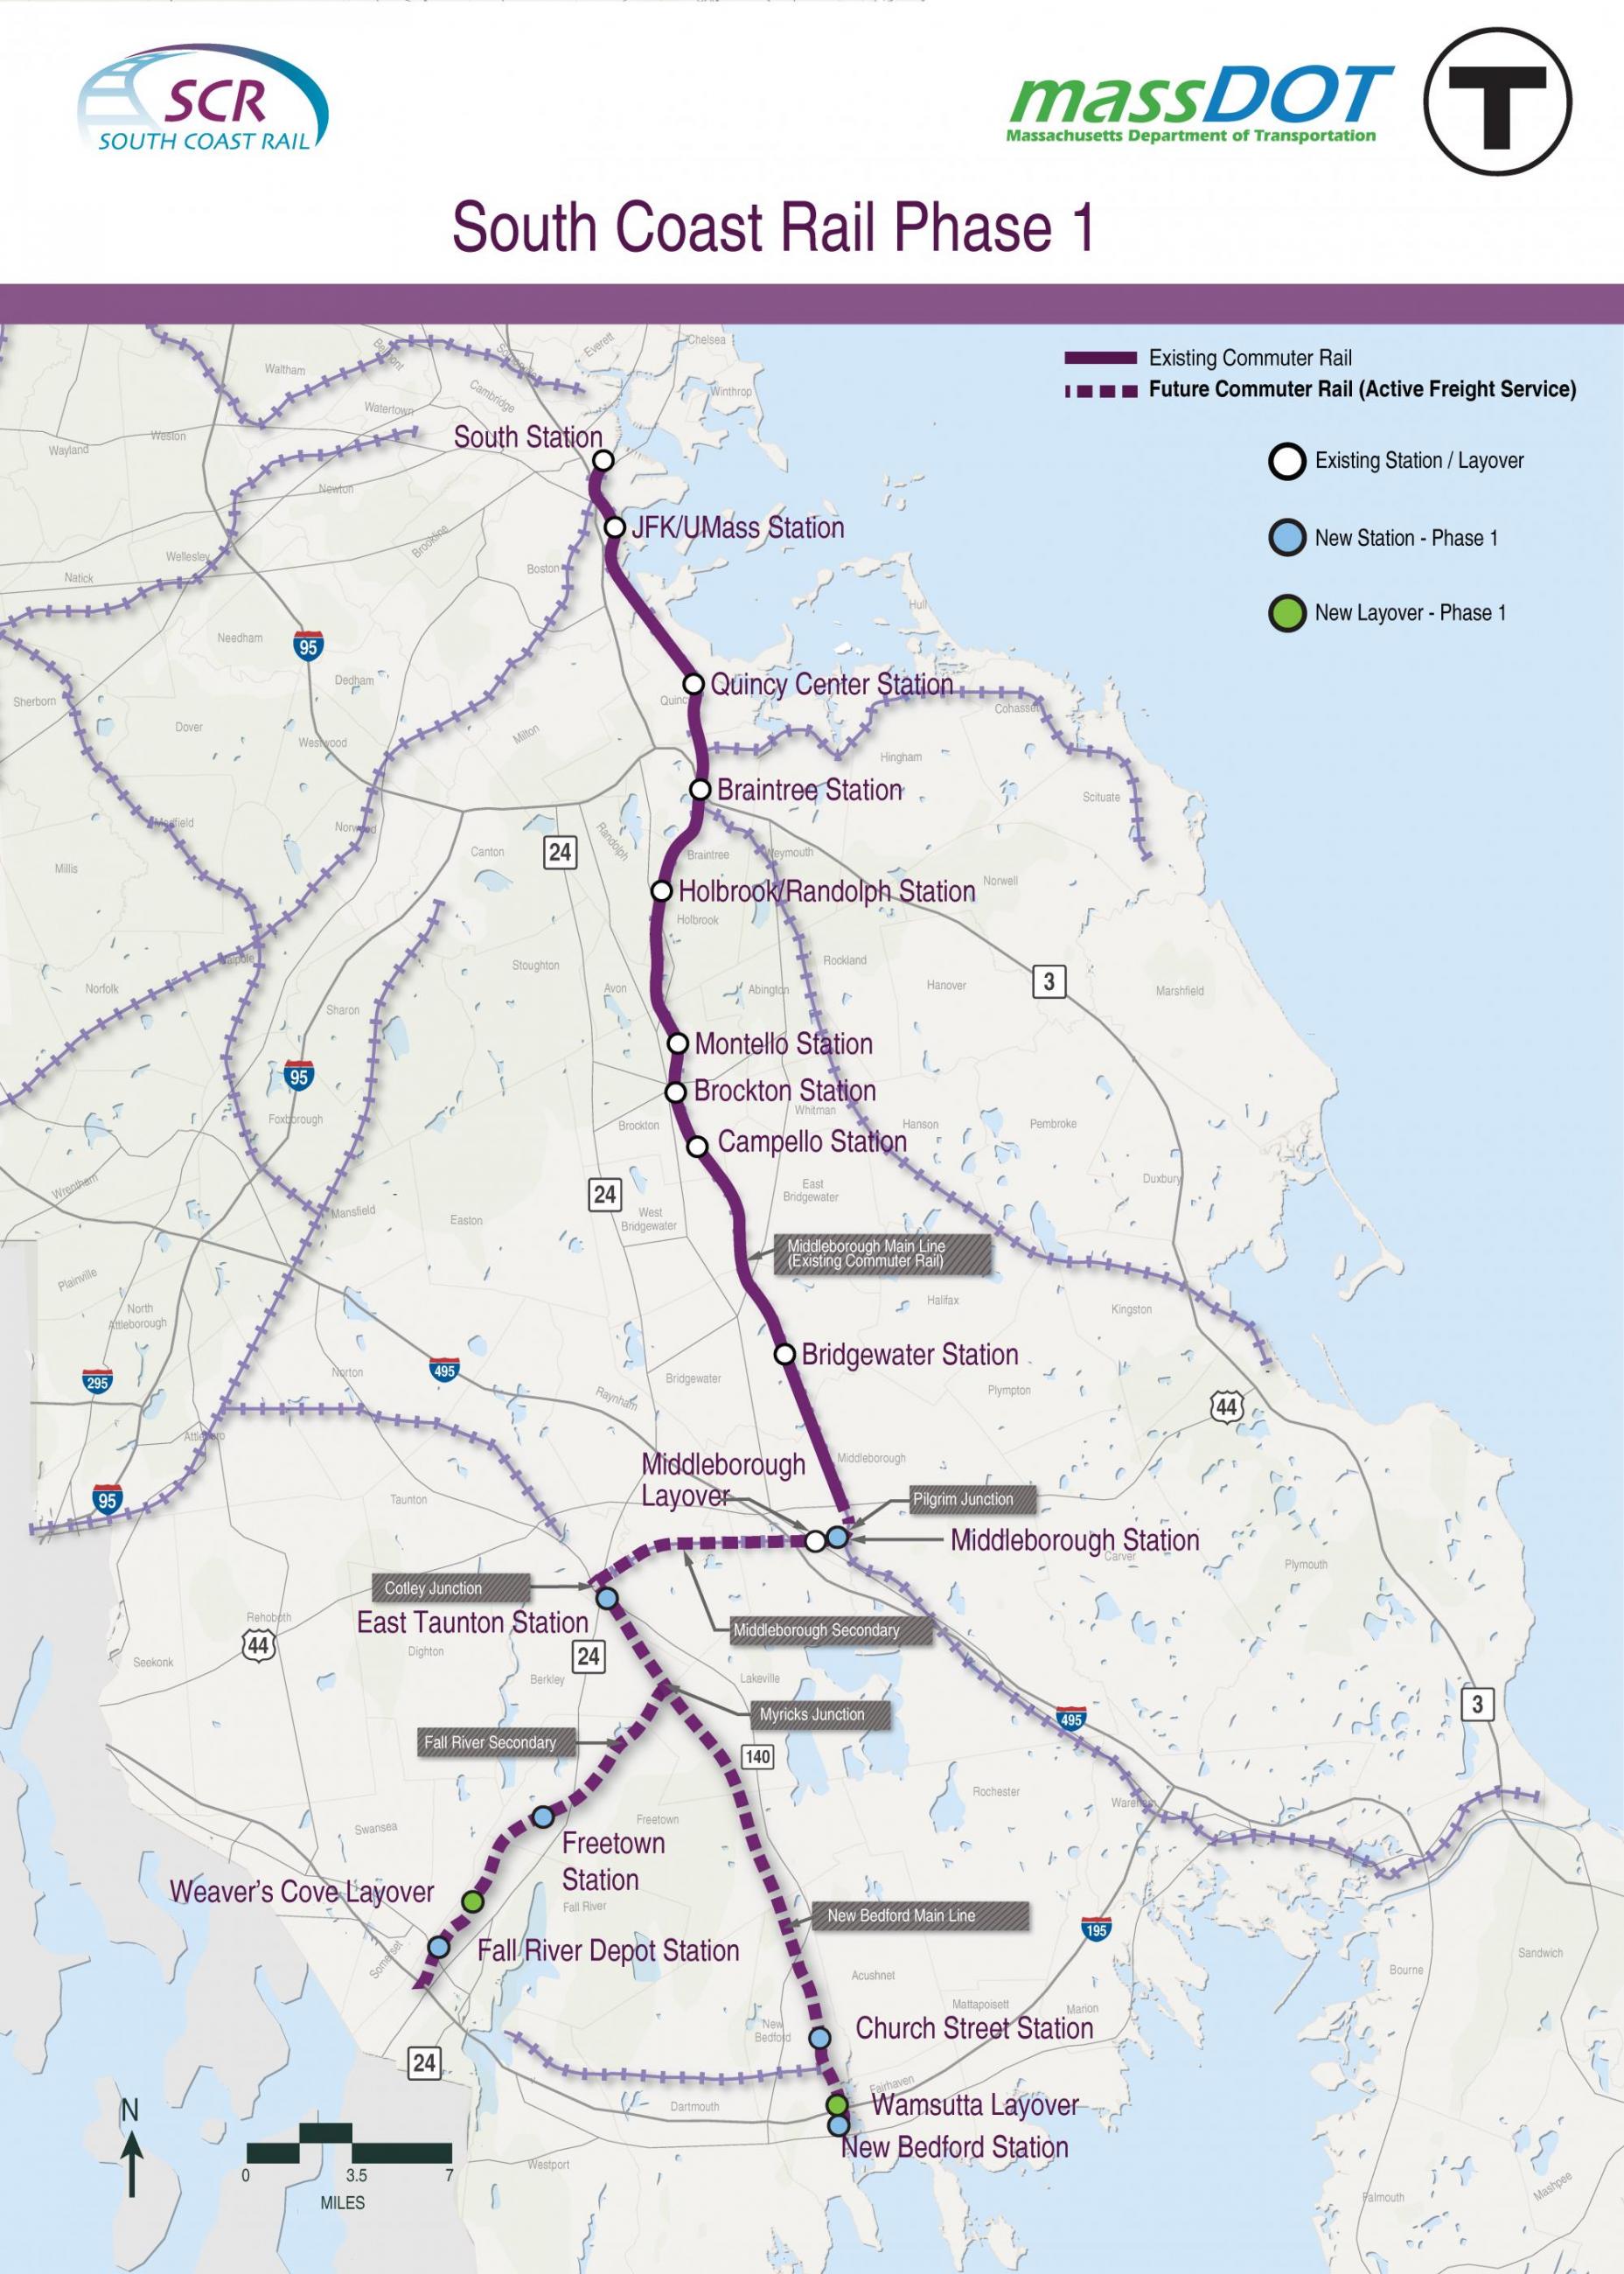 A map of the South Coast Rail Phase 1 corridor showing the Fall River Secondary, New Bedford, and Middleborough Secondary lines and stations